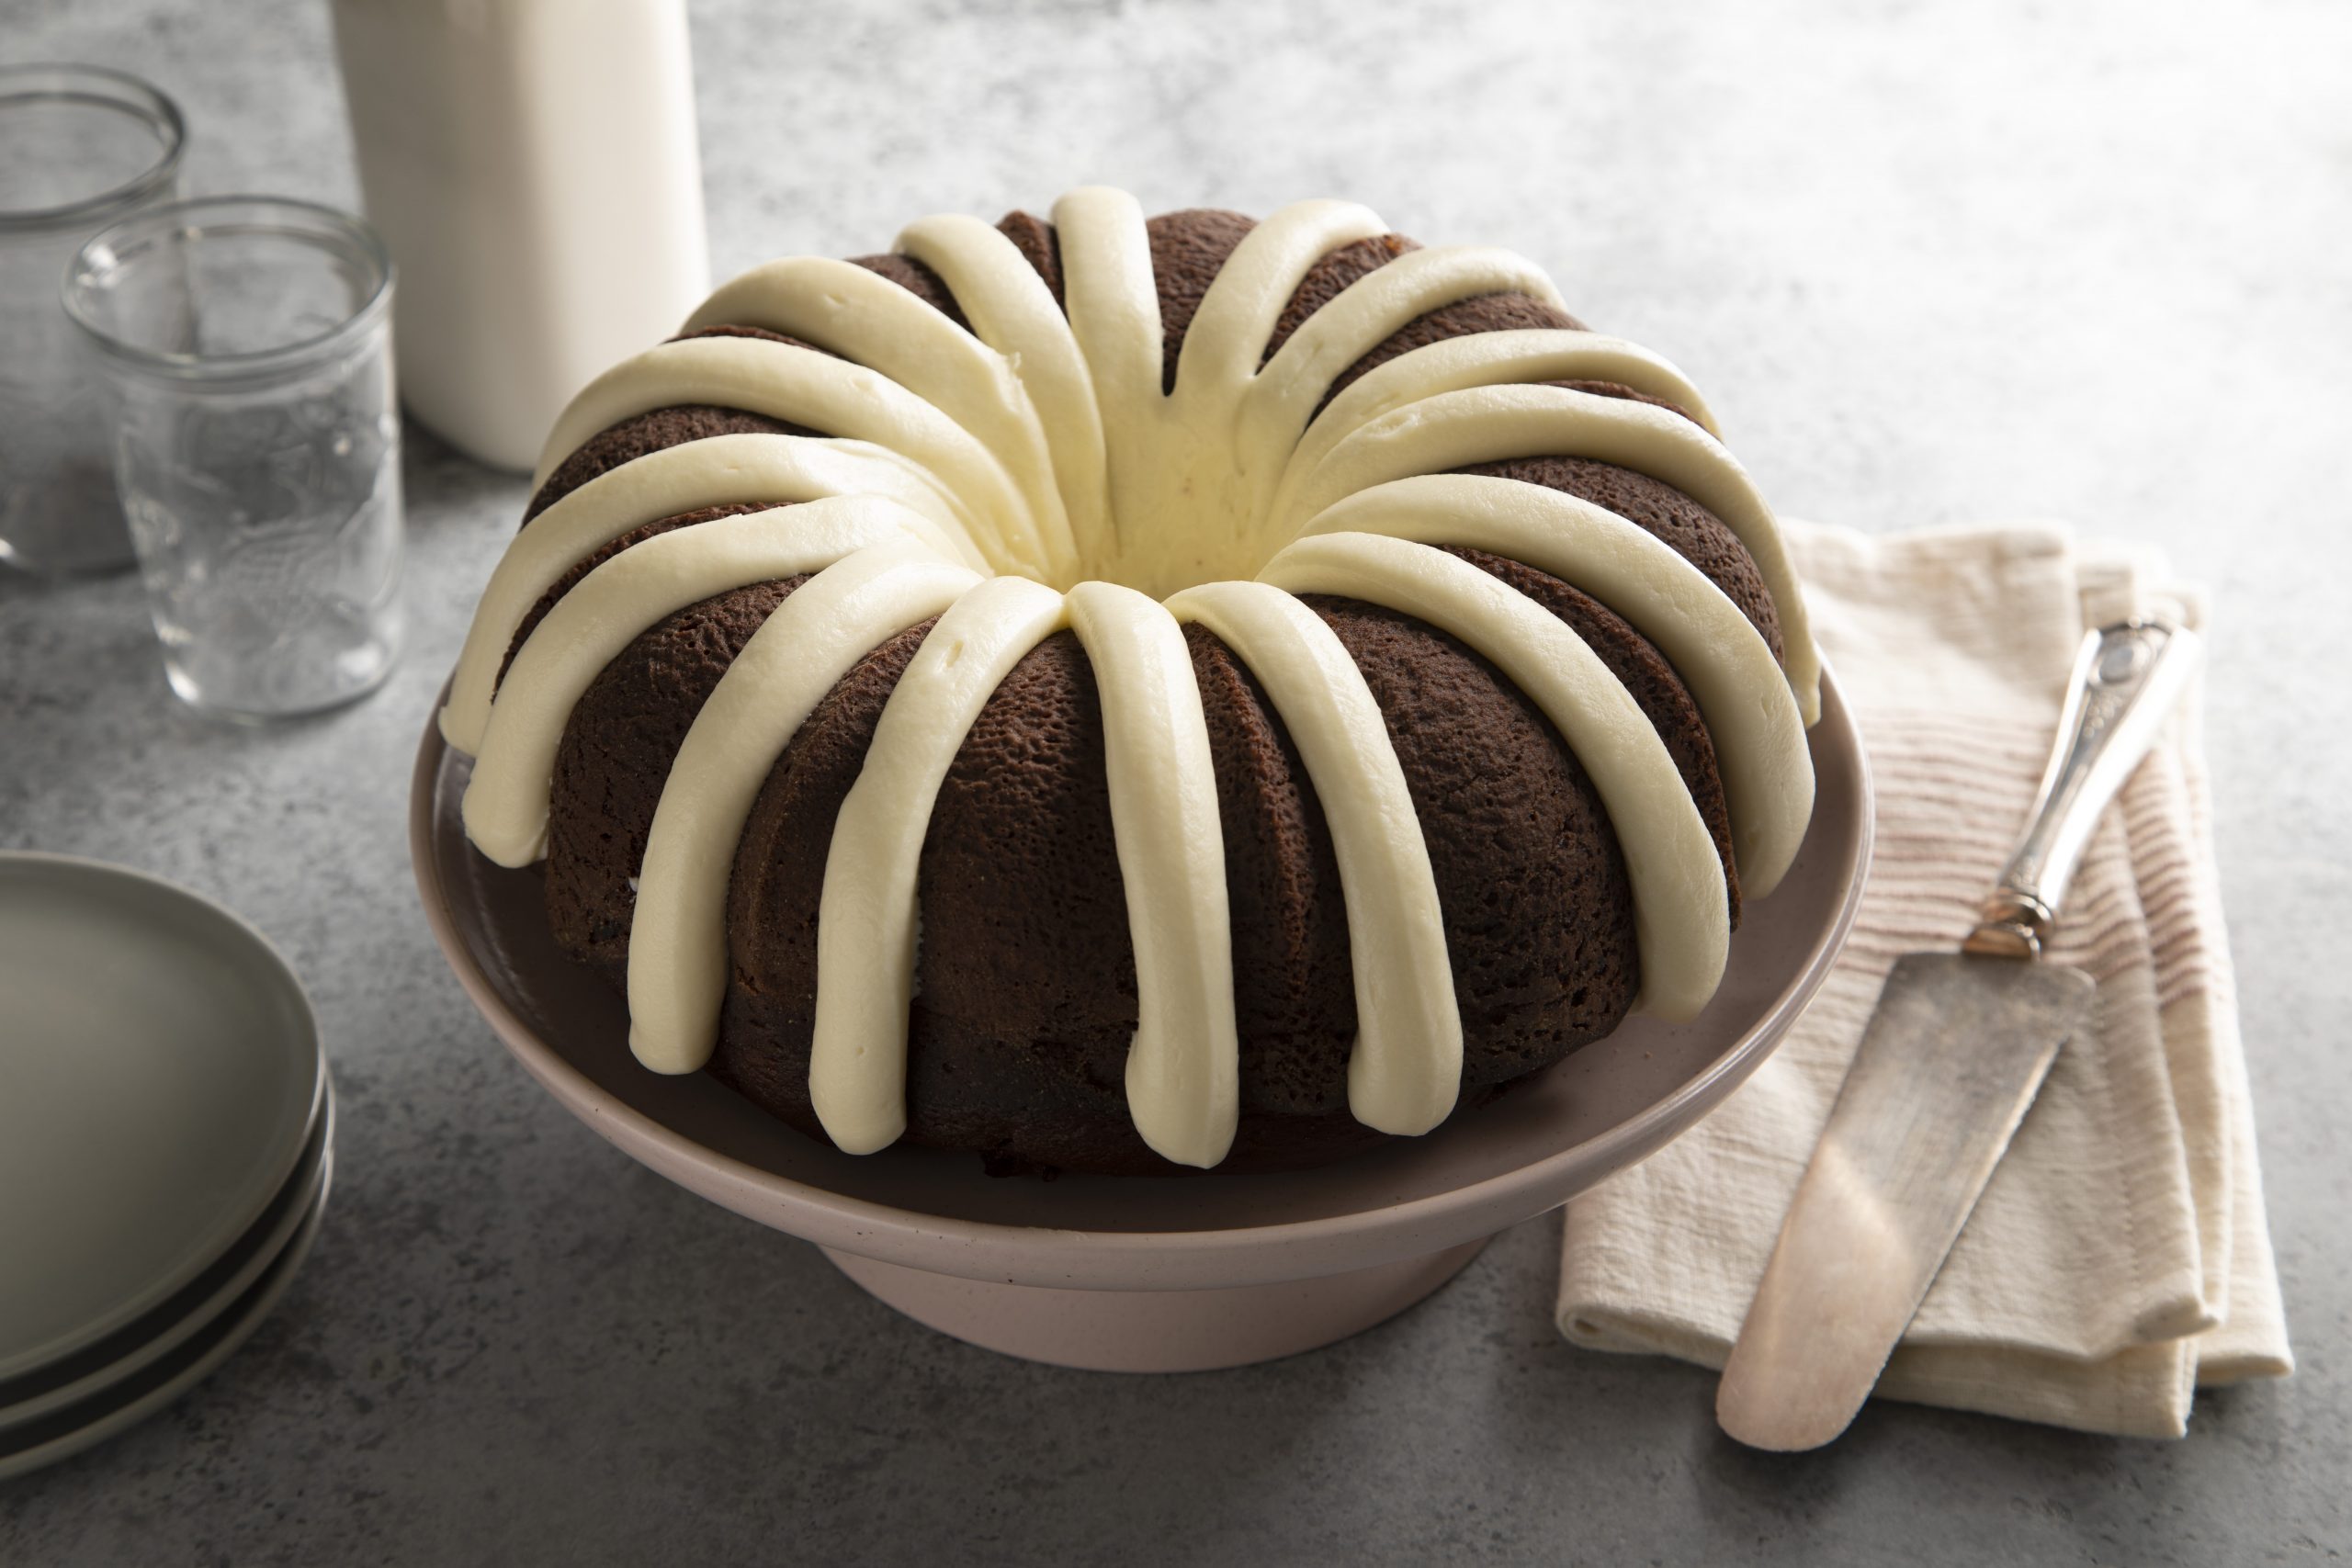 Copycat Nothing Bundt Cake Recipe You Can Make at Home